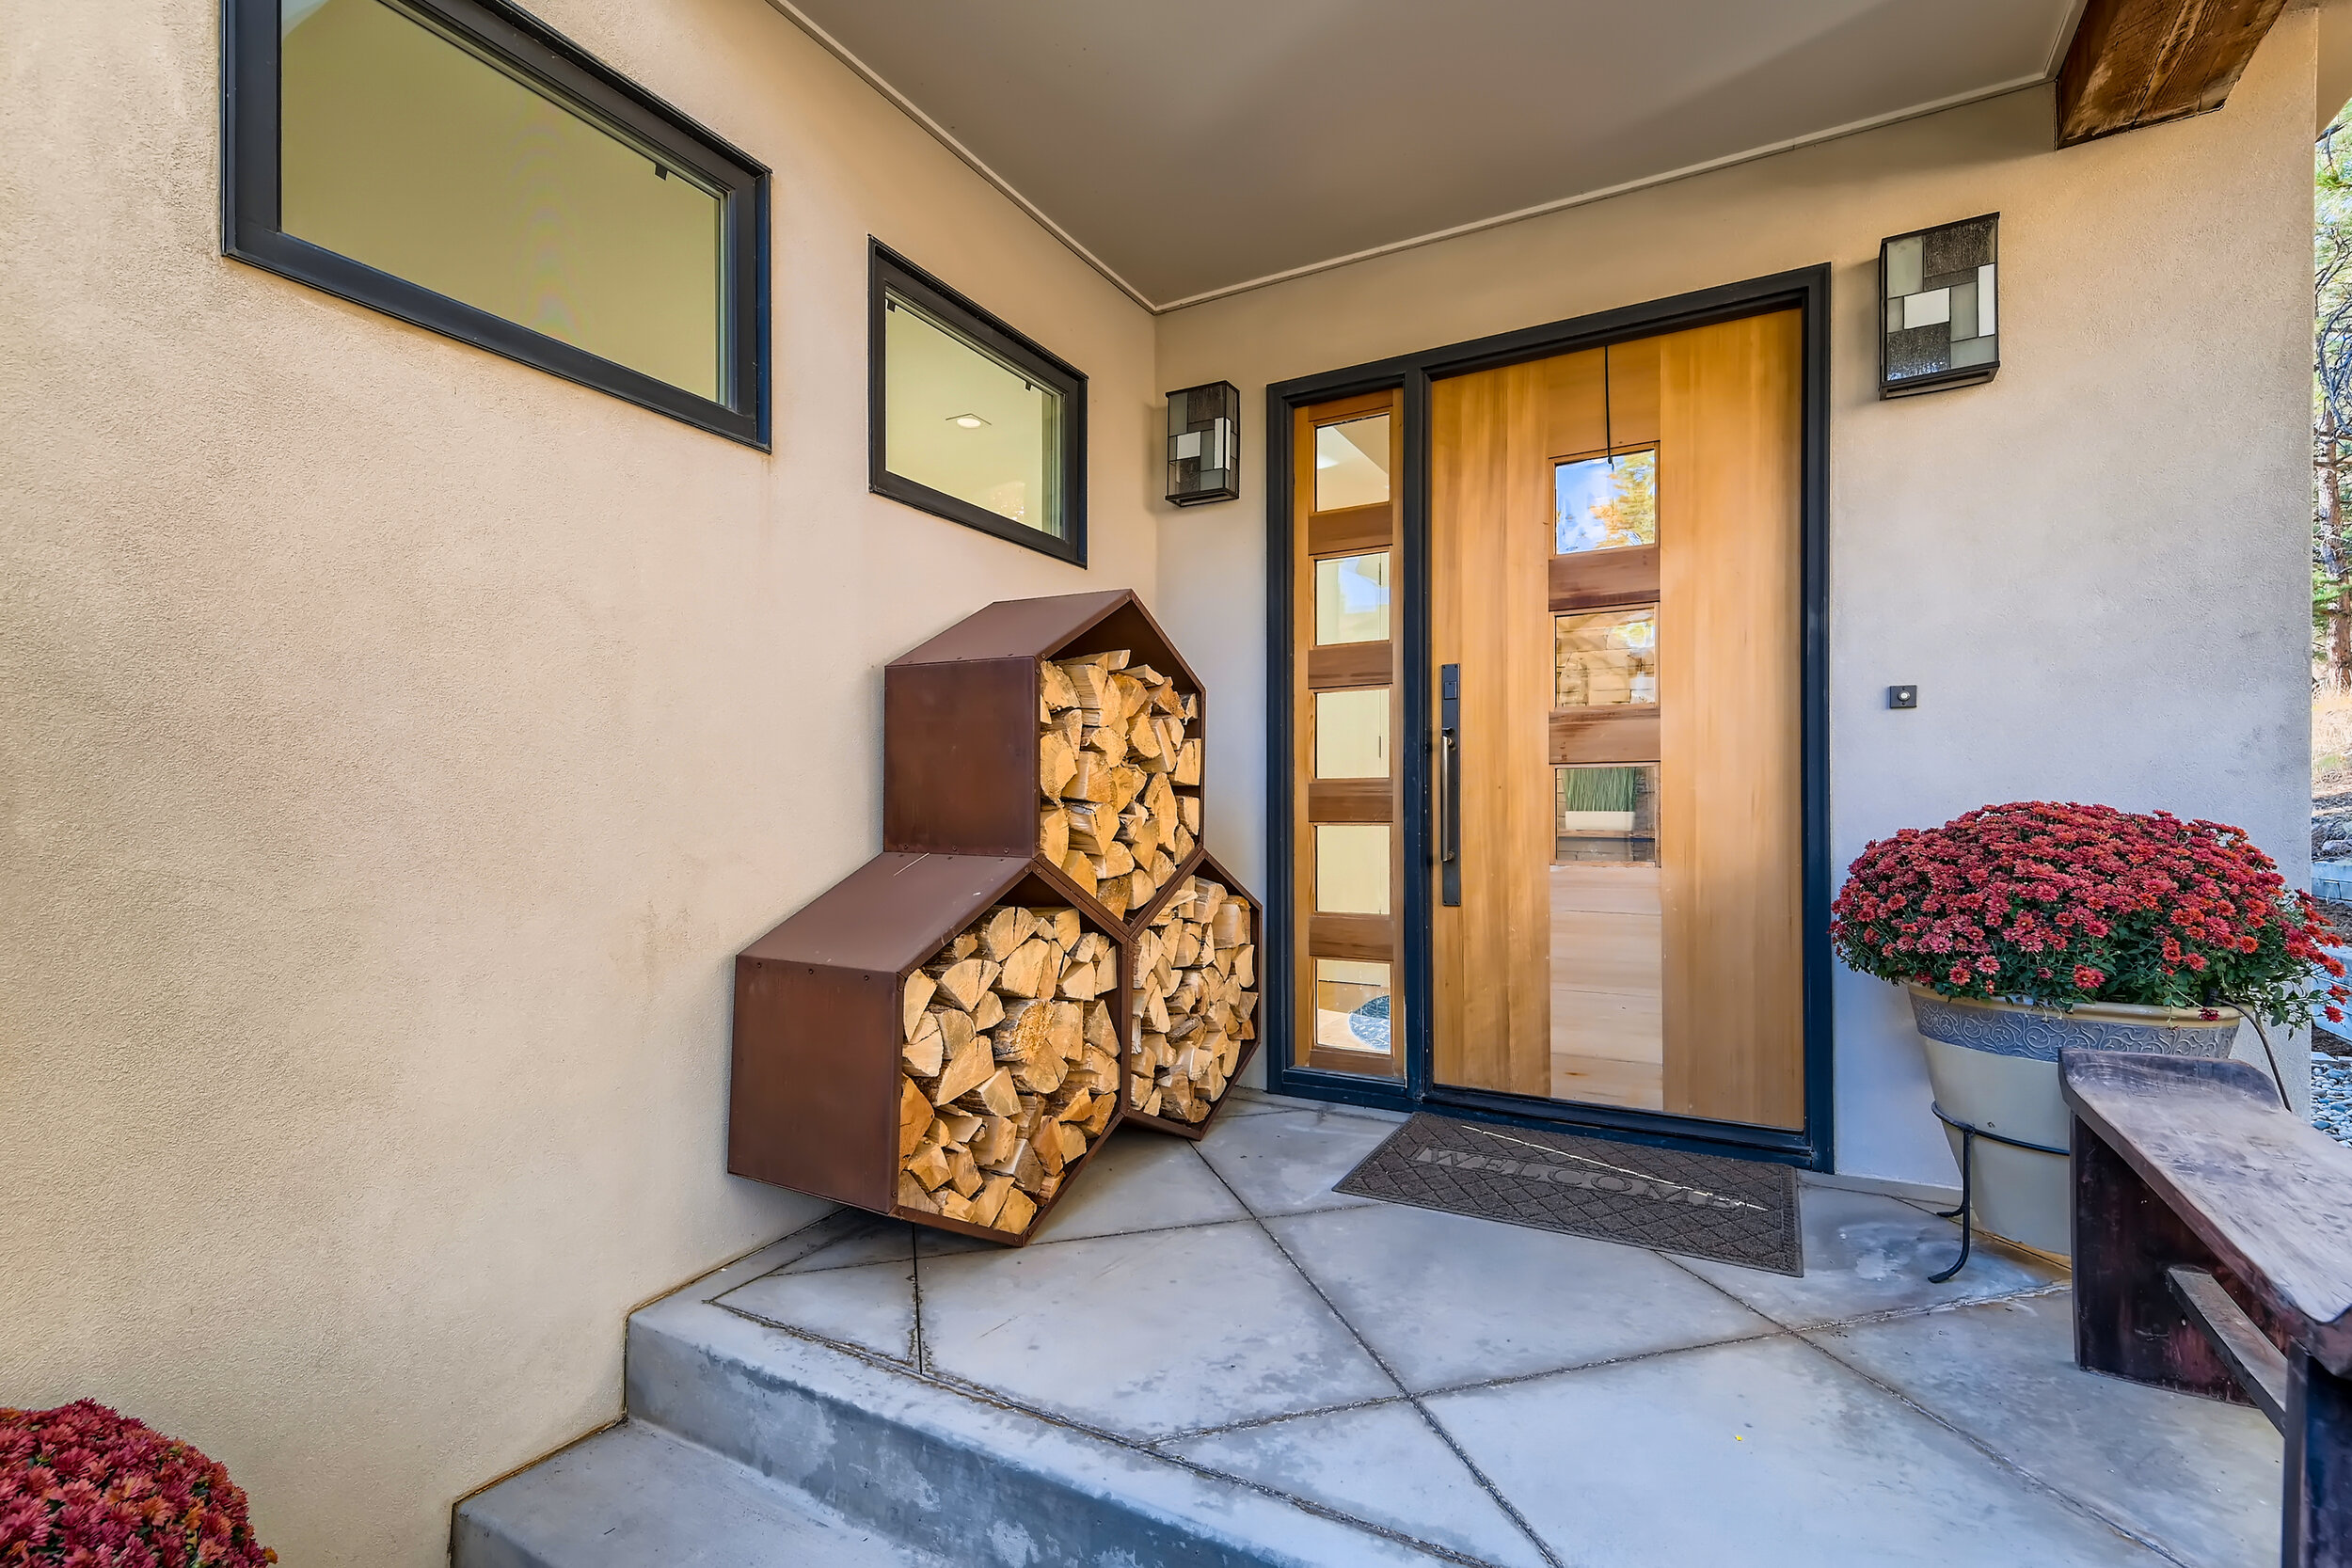 153 Poorman Rd Boulder CO - Print Quality - 005 - 06 Exterior Front Entry.jpg